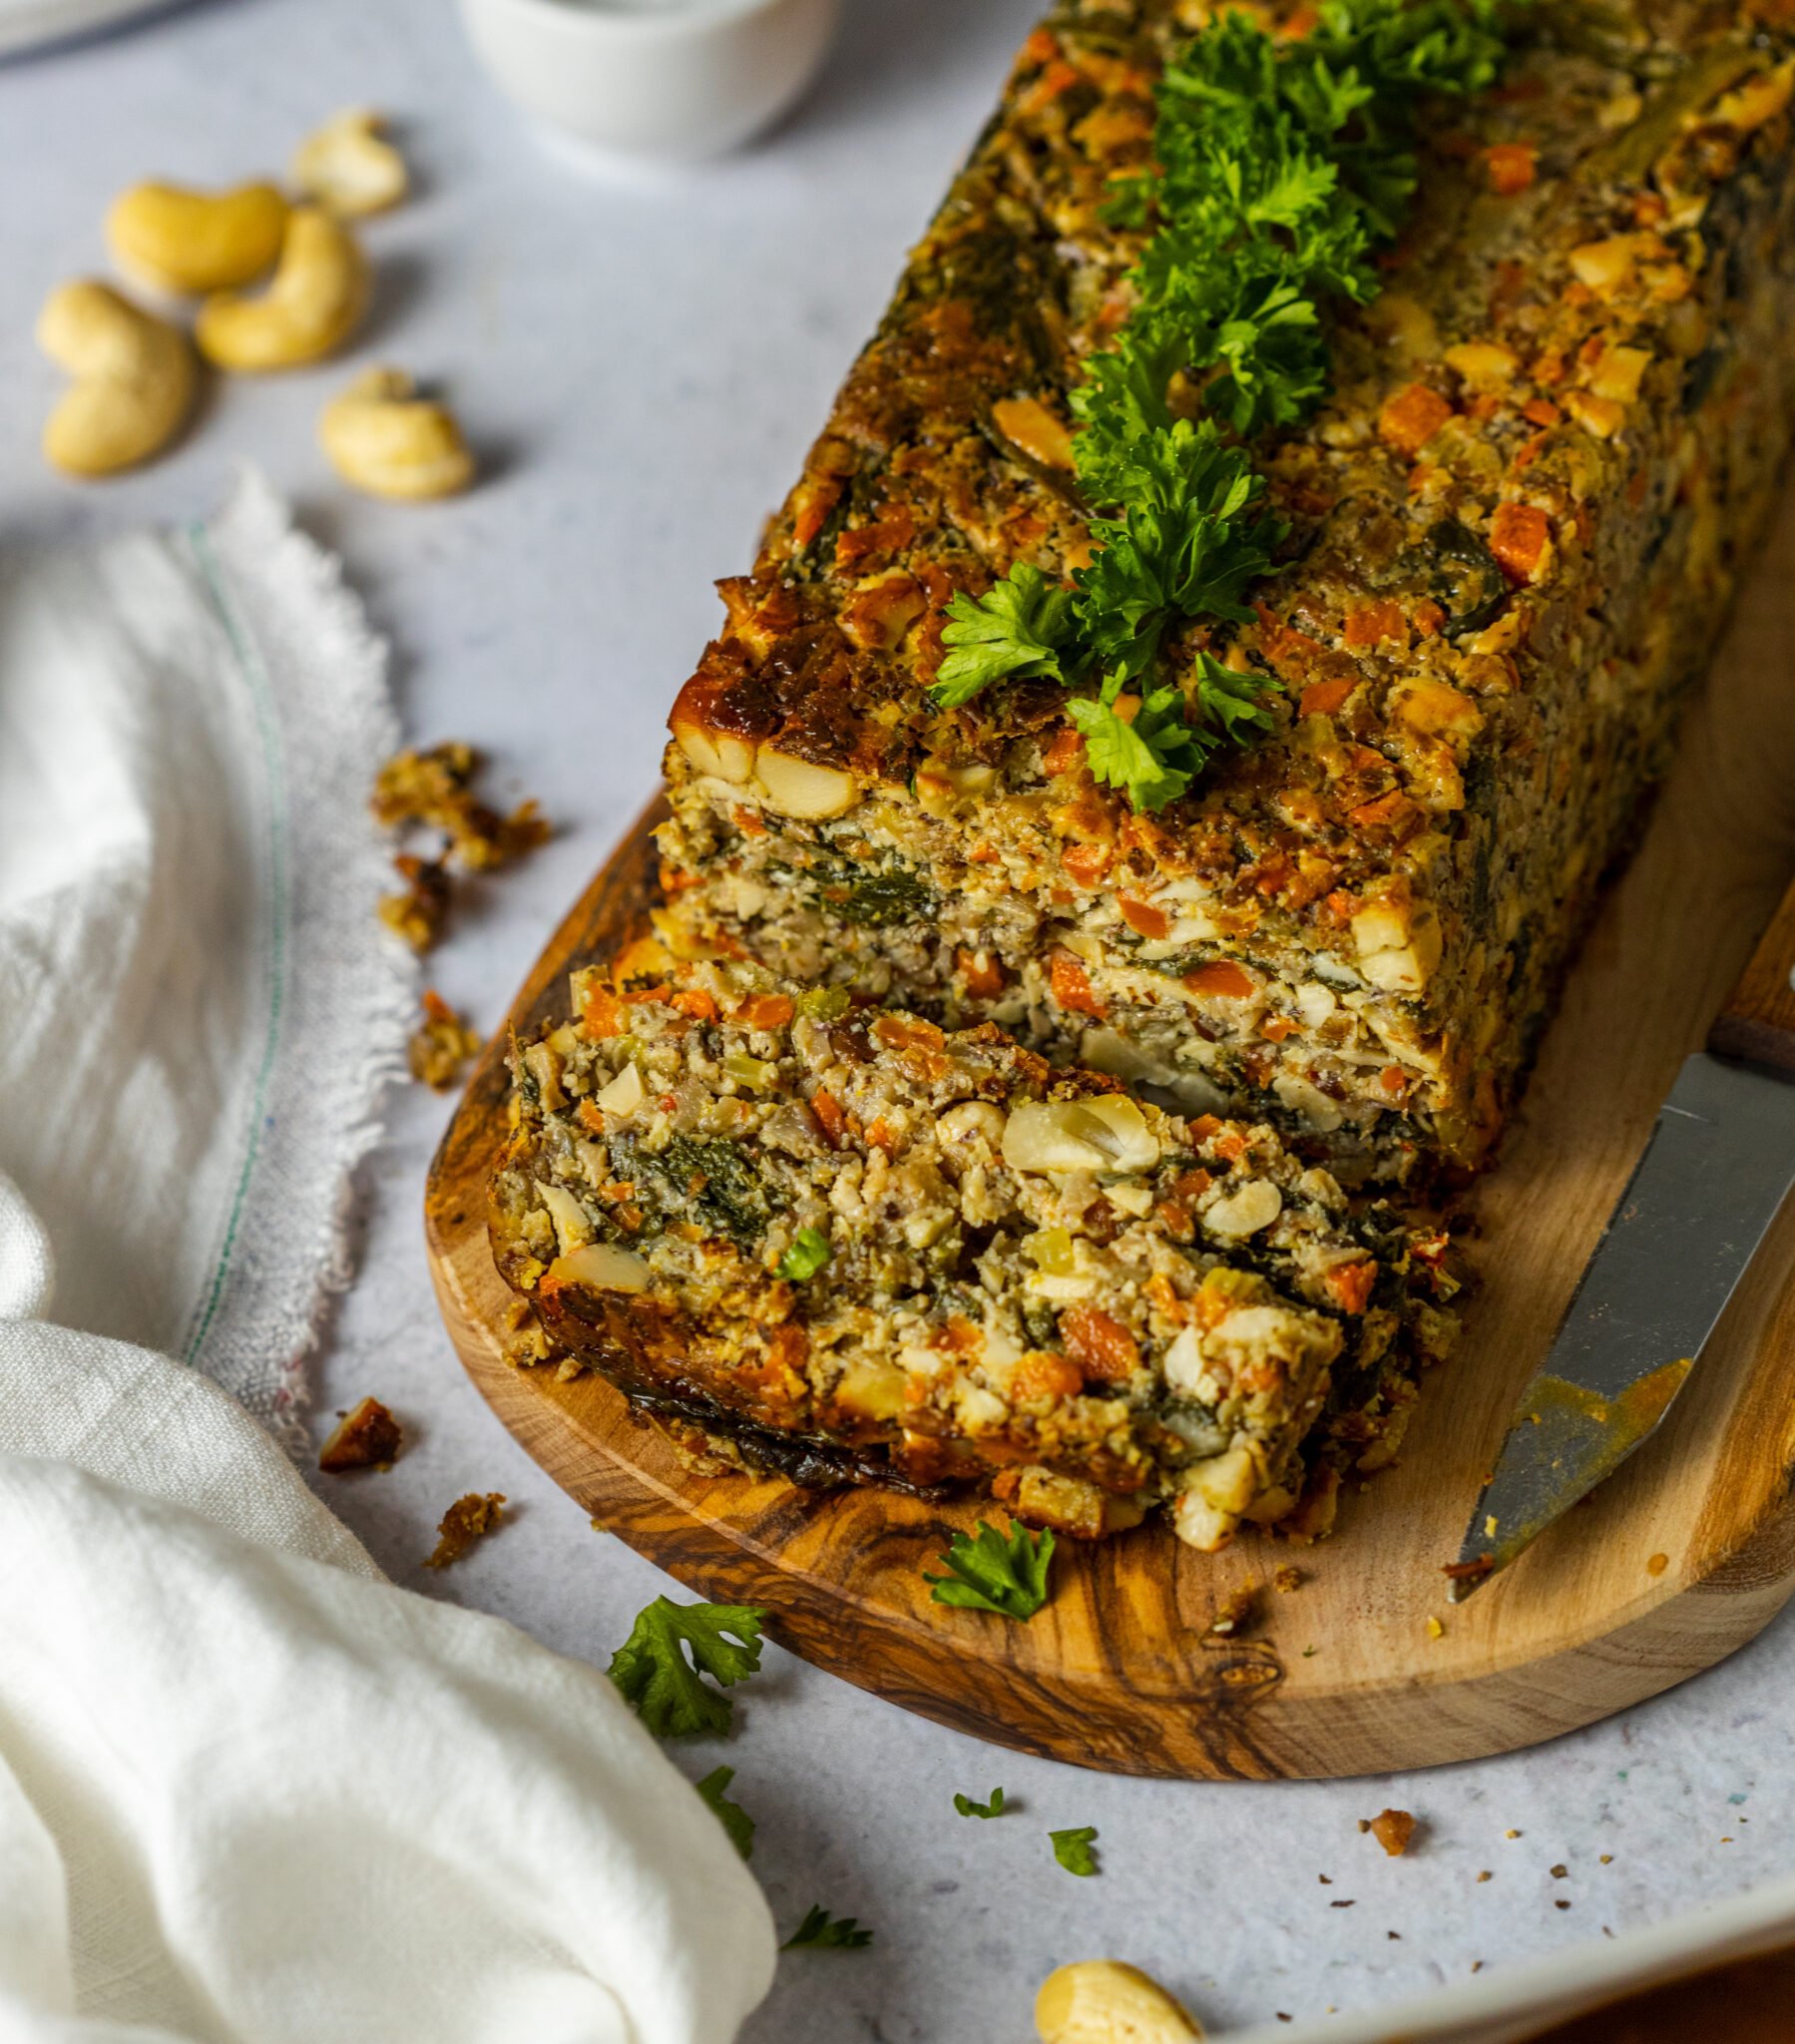 Bored Of Nut Roasts? Try This Wild Mushroom Loaf For Your Next Sunday ...